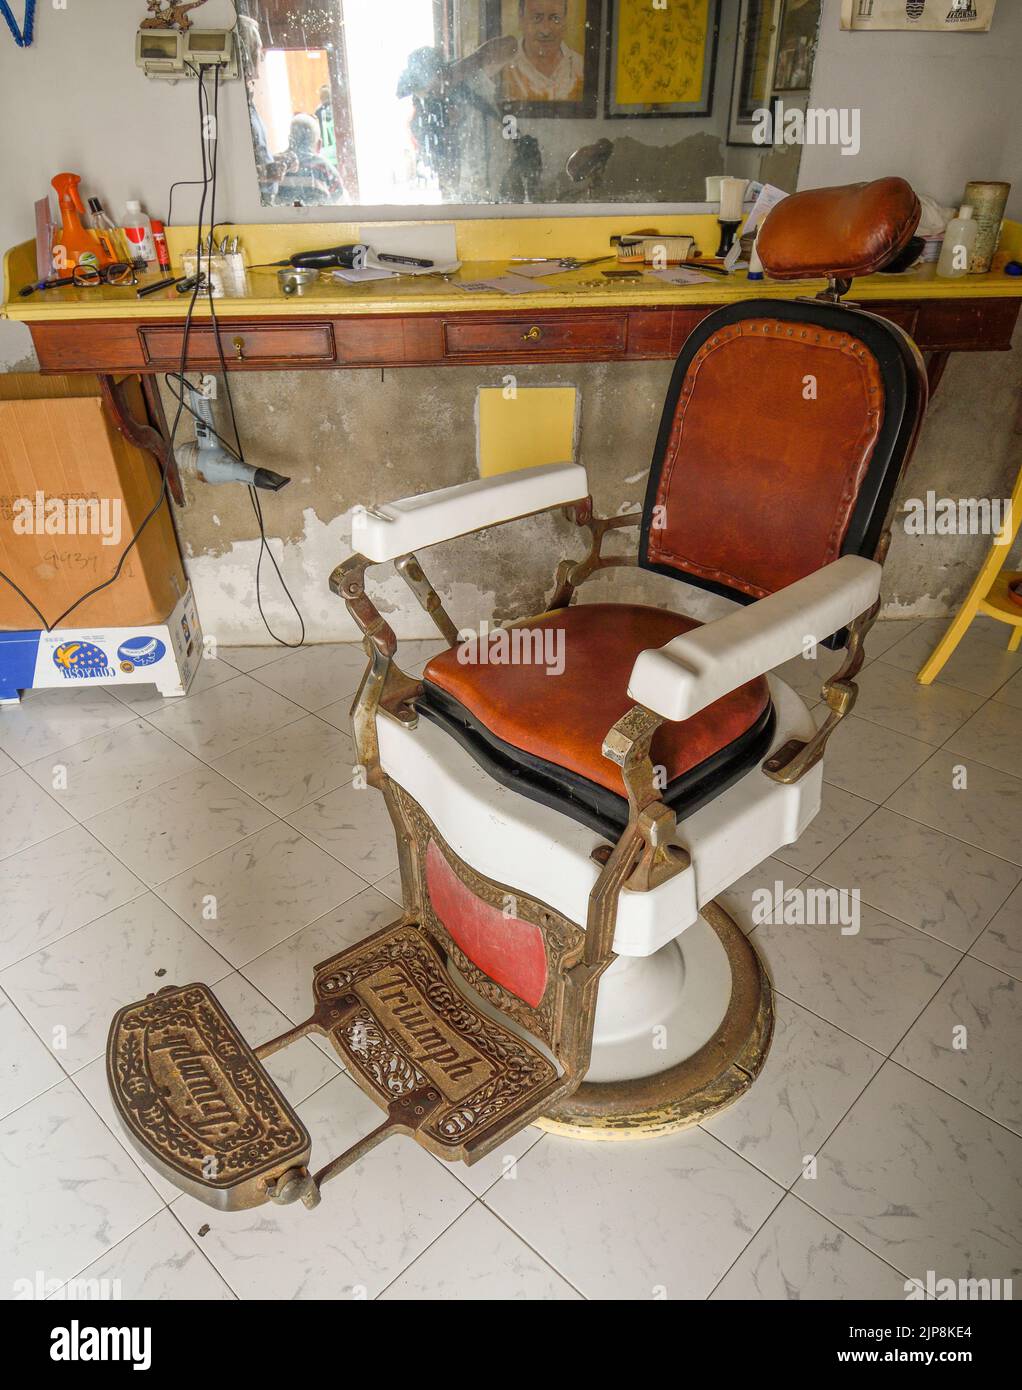 Old barbershop with the chair for haircuts in the center of the image Stock Photo